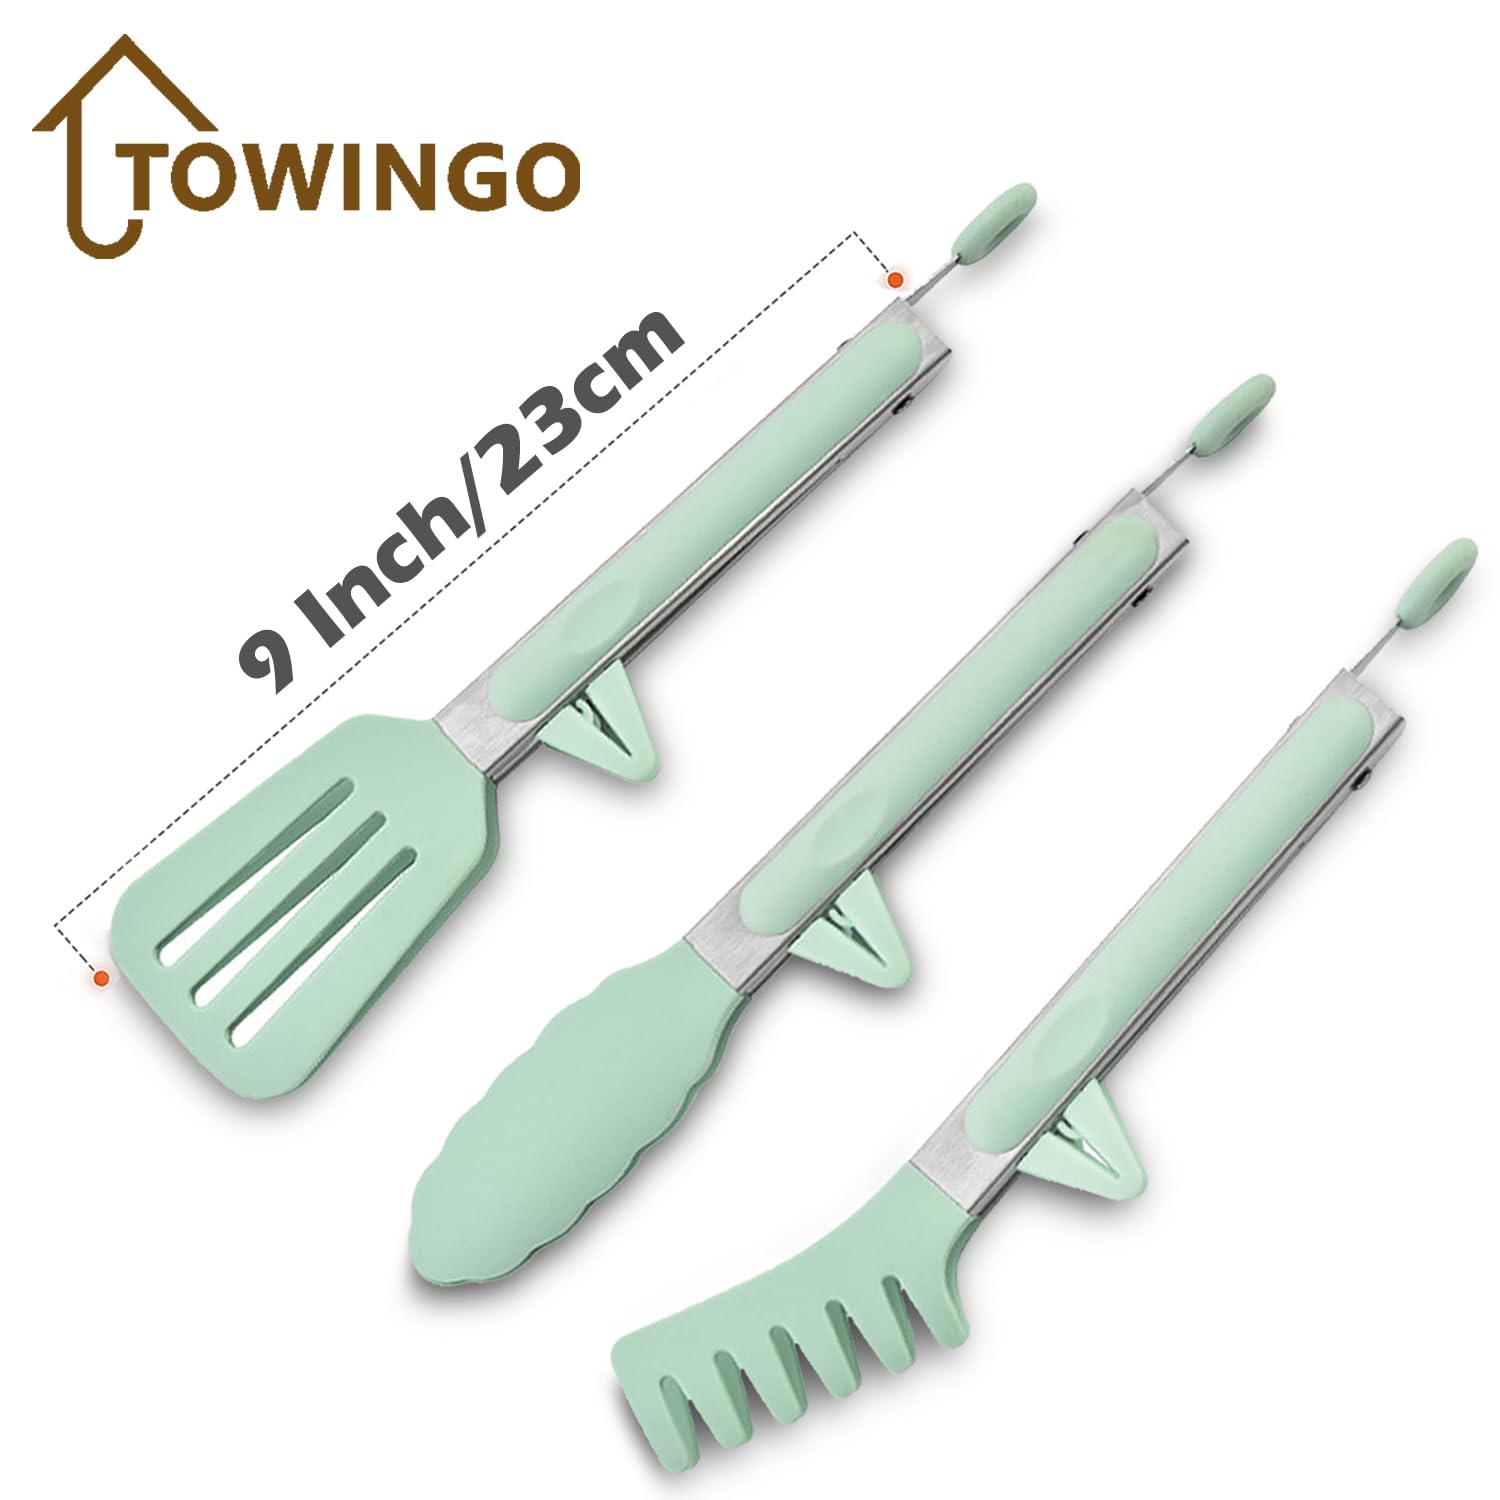 Kitchen Tongs for Cooking, 9 Inch Small Silicone Tongs, Food Grade Mini Serving Tongs with Silicone Tips, Set of 3, Green